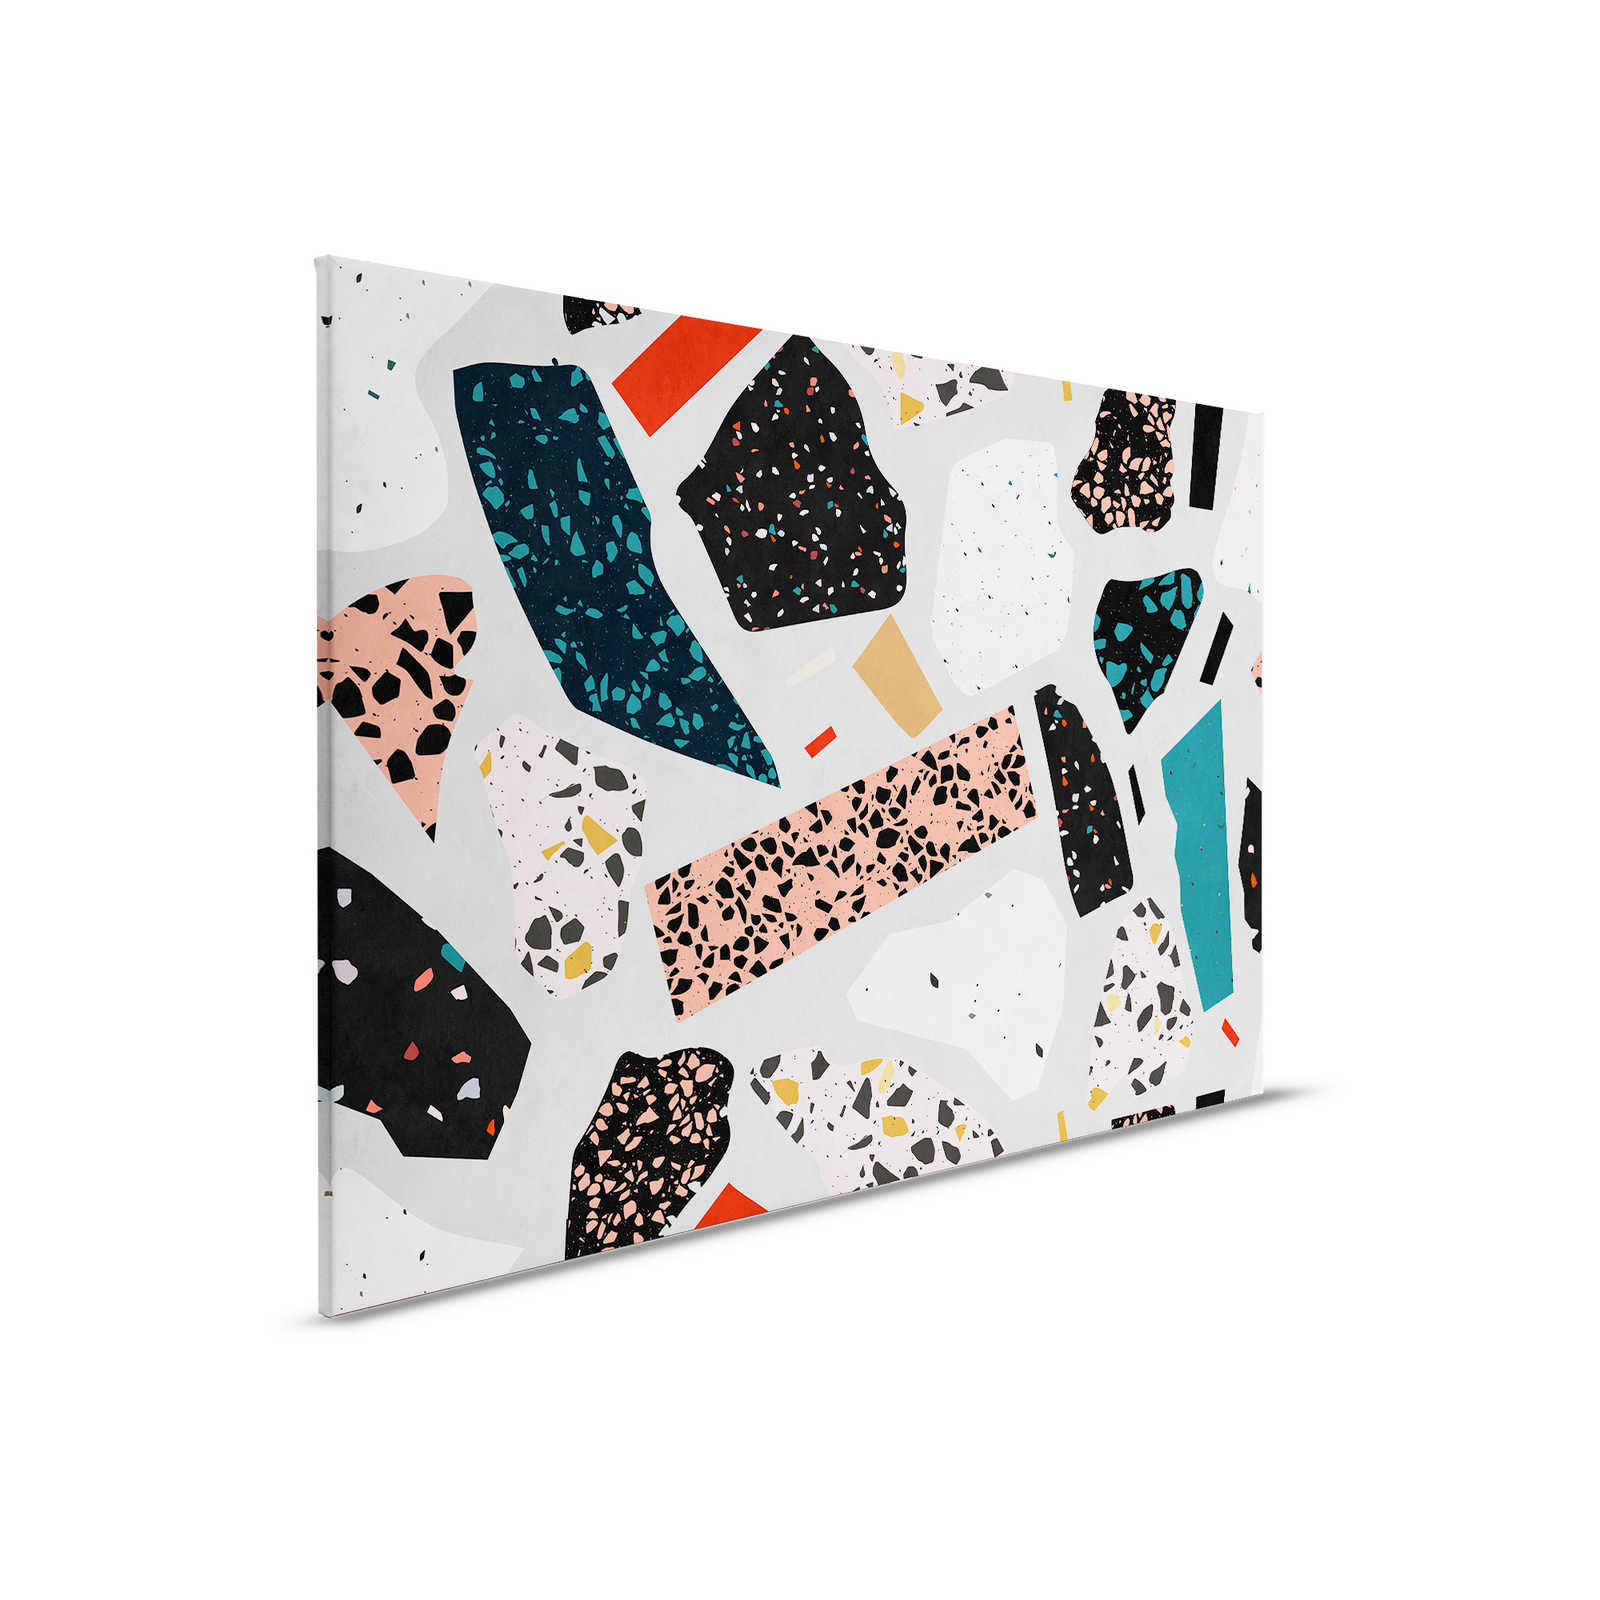         Terrazzo 1 - Canvas painting Terrazzo patterned, stone look in blotting paper structure - 0.90 m x 0.60 m
    